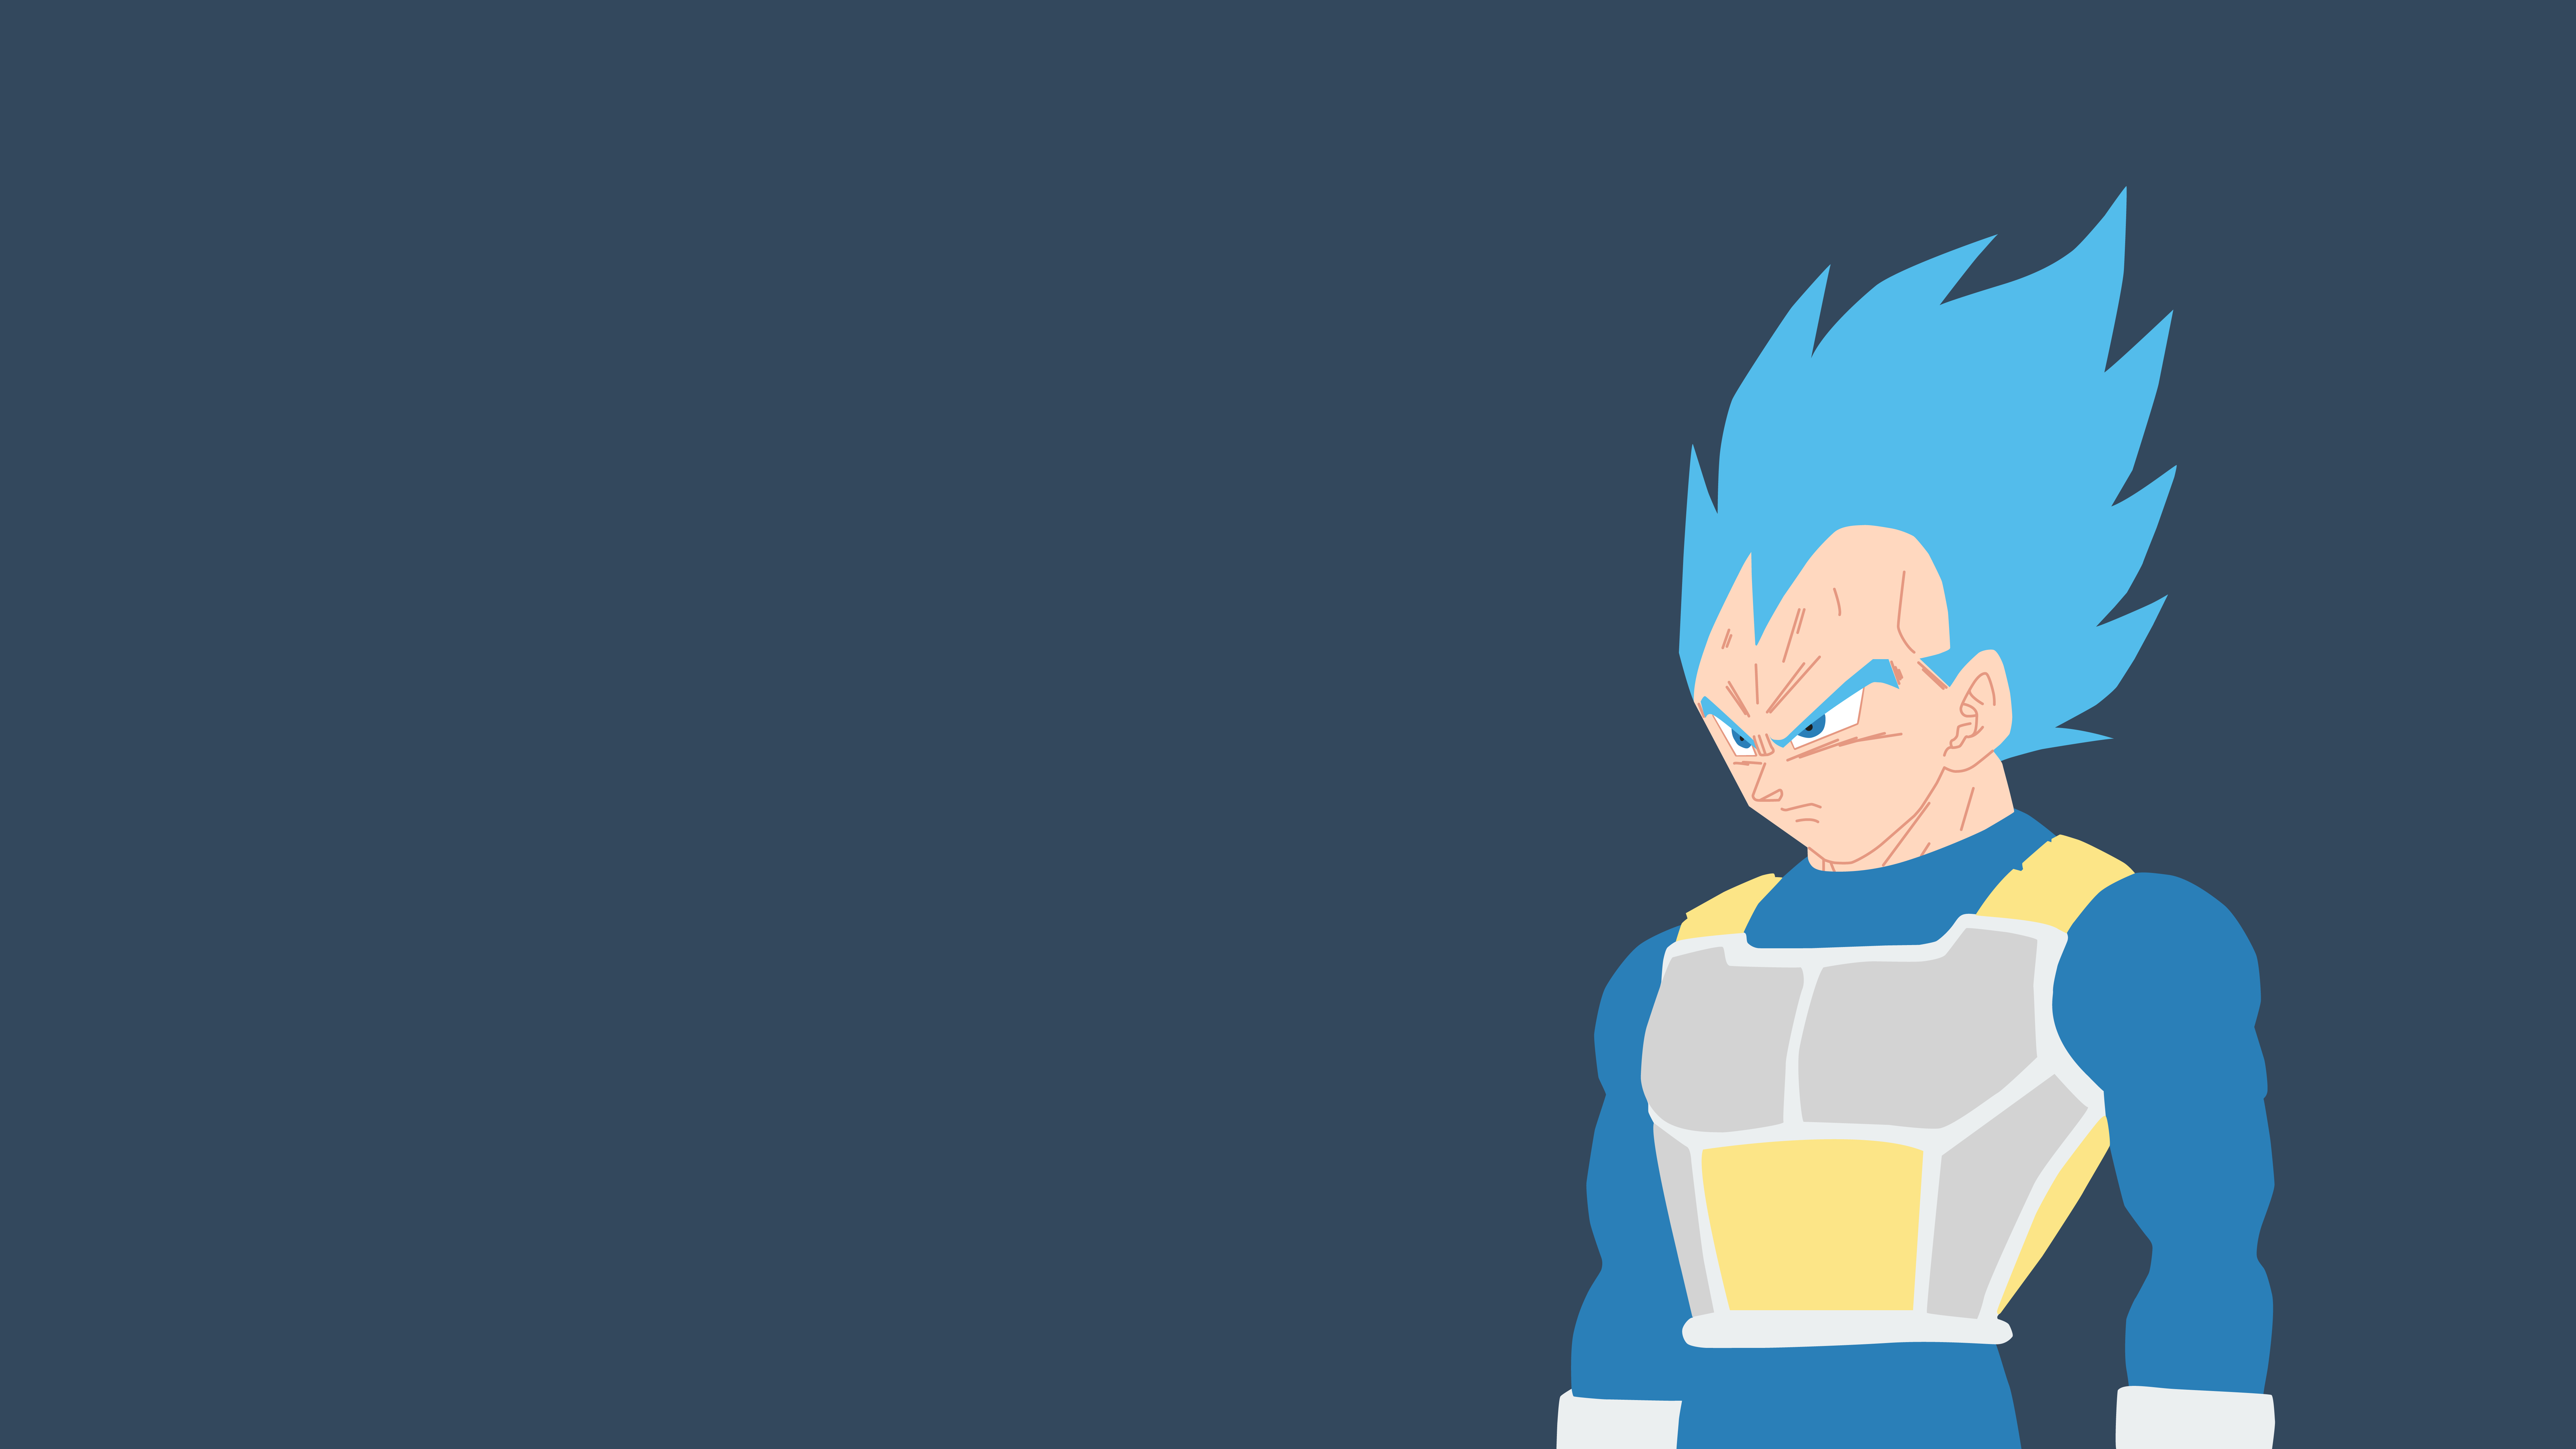 180+ Super Saiyan Blue HD Wallpapers and Backgrounds